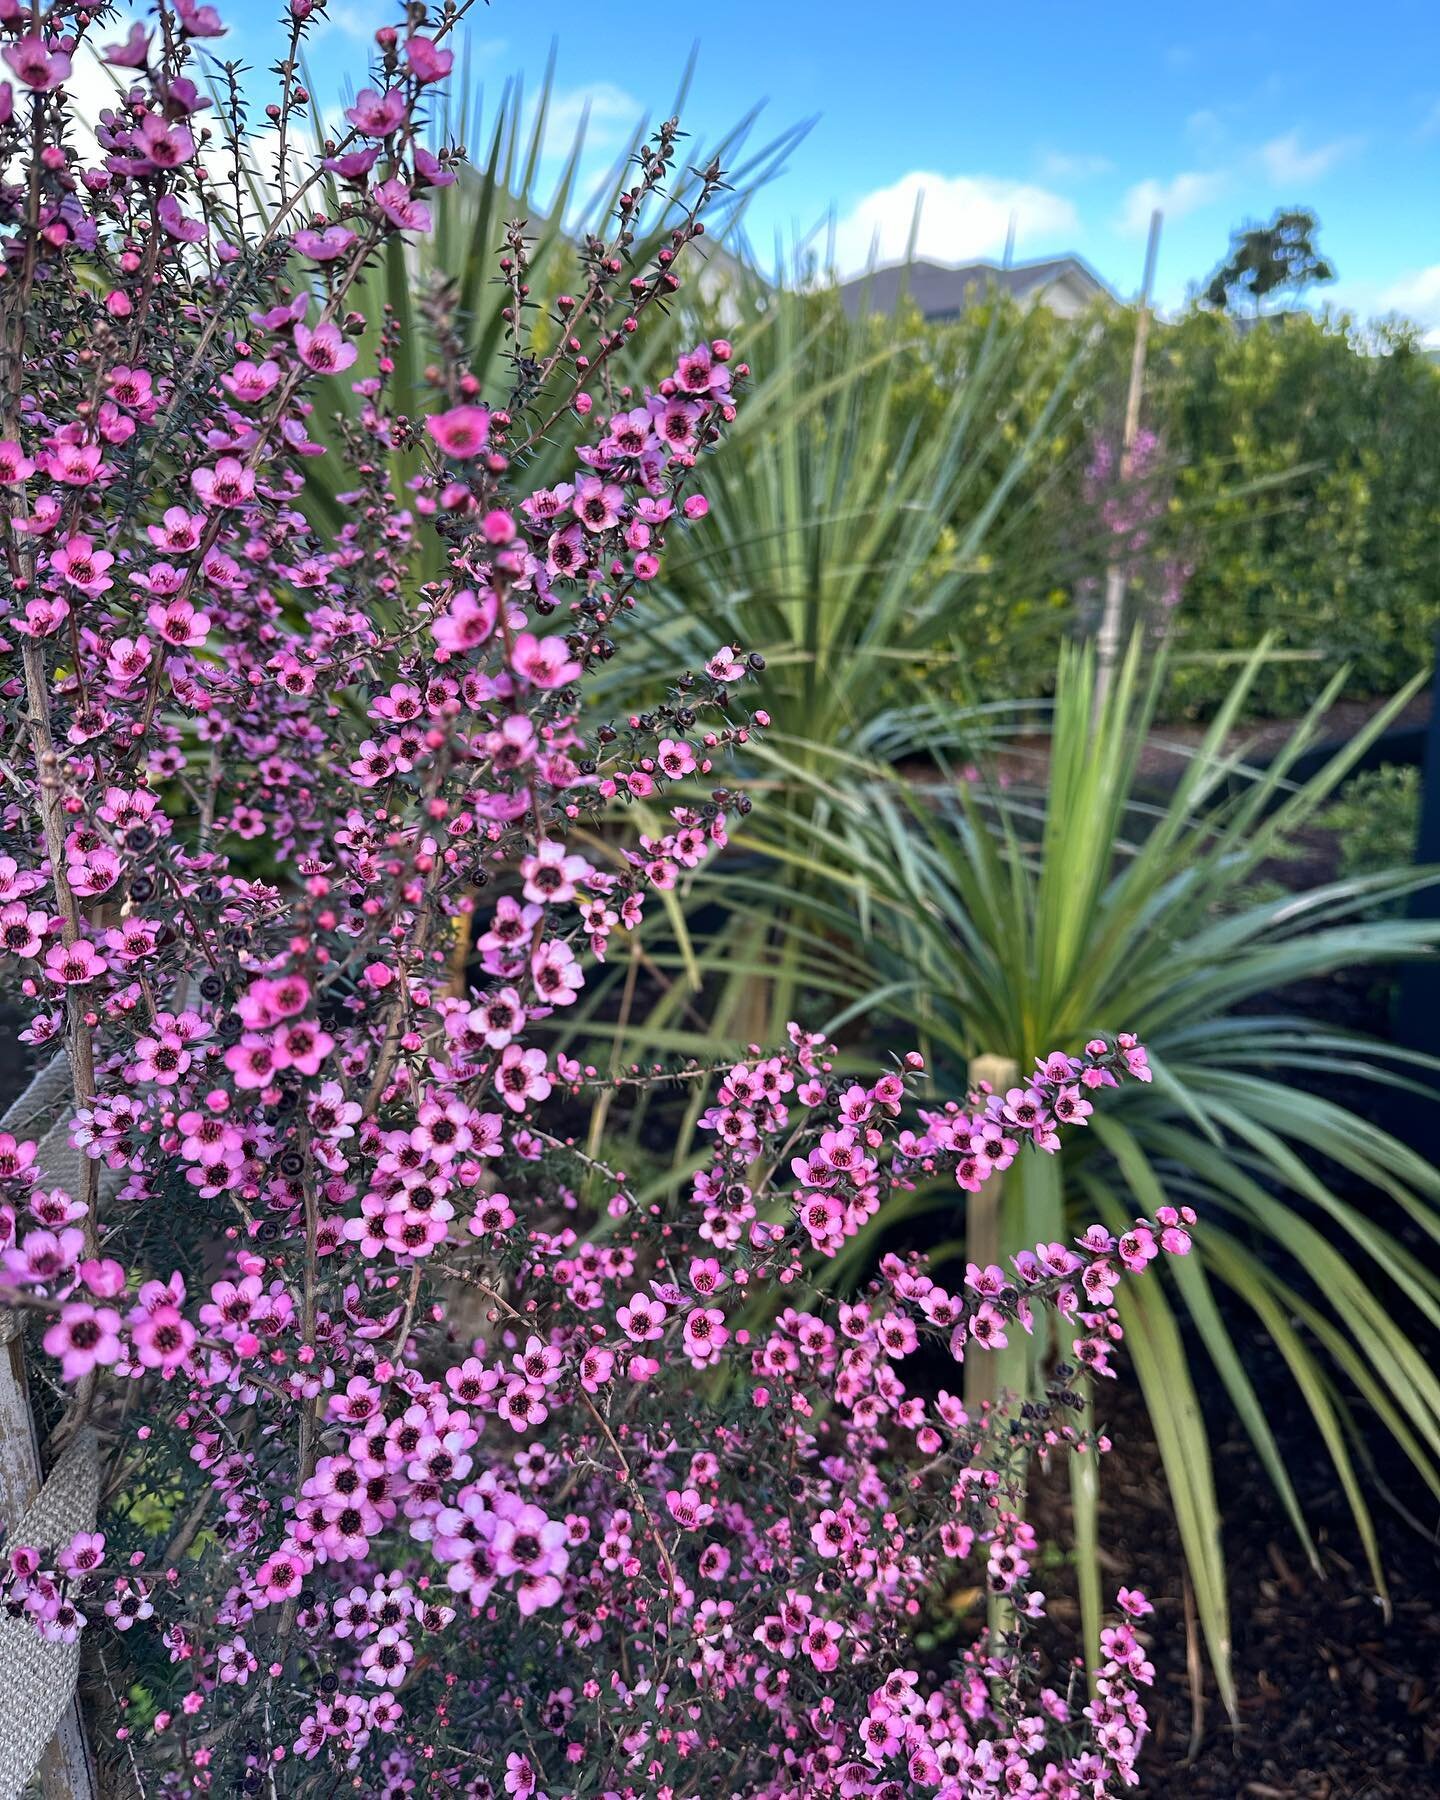 Leptospermum &lsquo;Wiri Shelley&rsquo;planted a few months ago by @featurelandscapes never seems to stop flowering even in winter with a huge amount of rain in difficult soil conditions 🌸🌧️
A great compact Manuka 2m by 1.5m wide bred by Jack Hobbs